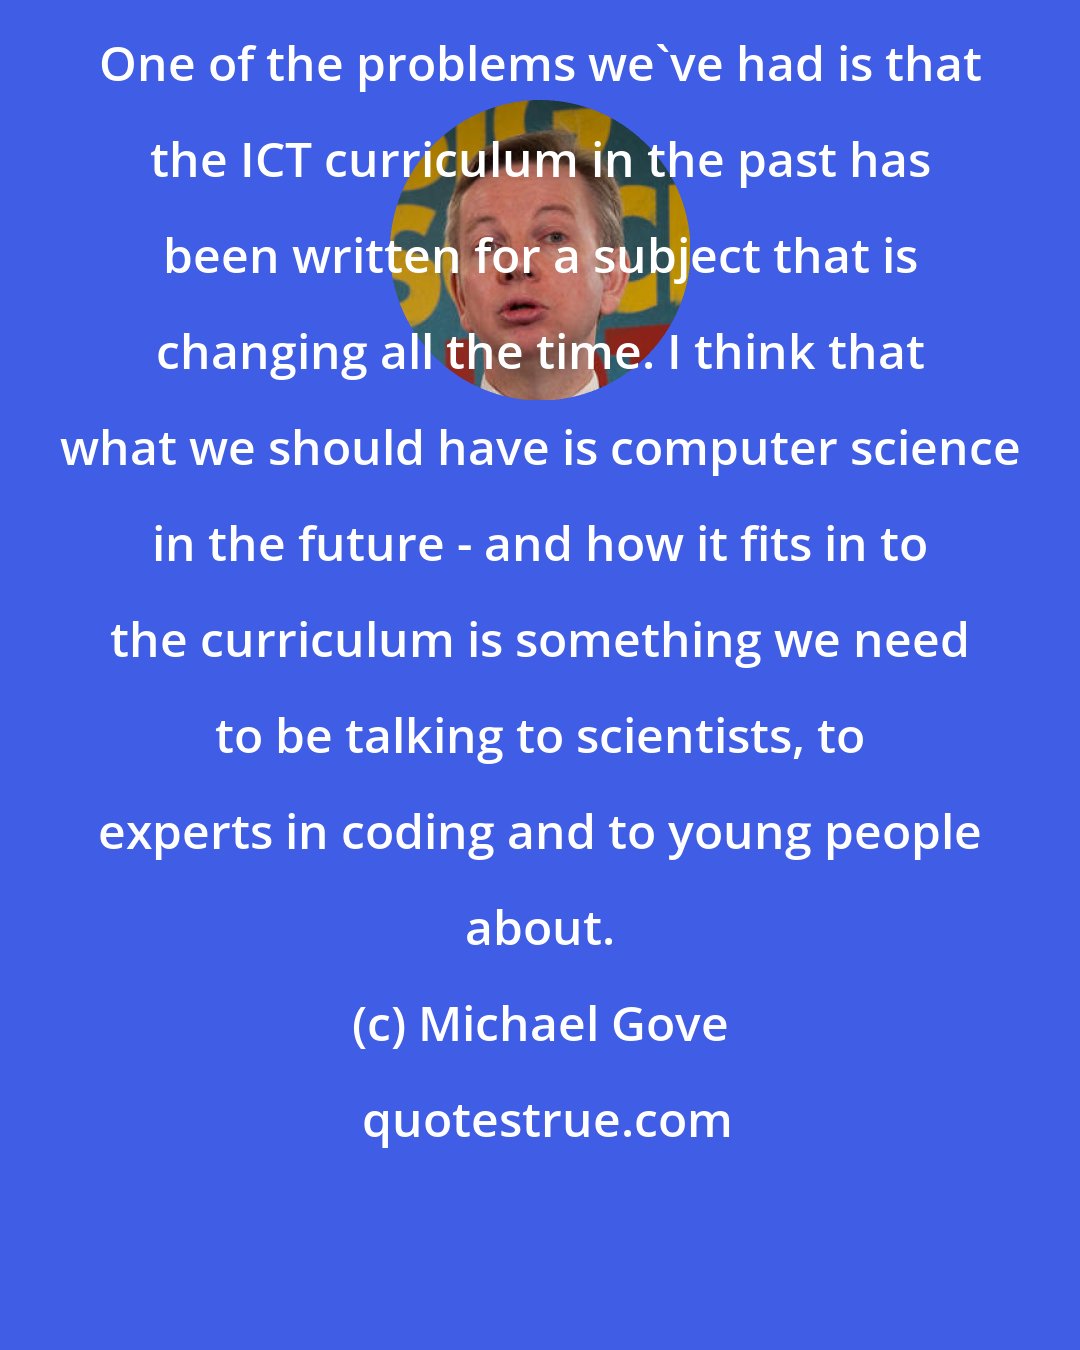 Michael Gove: One of the problems we've had is that the ICT curriculum in the past has been written for a subject that is changing all the time. I think that what we should have is computer science in the future - and how it fits in to the curriculum is something we need to be talking to scientists, to experts in coding and to young people about.